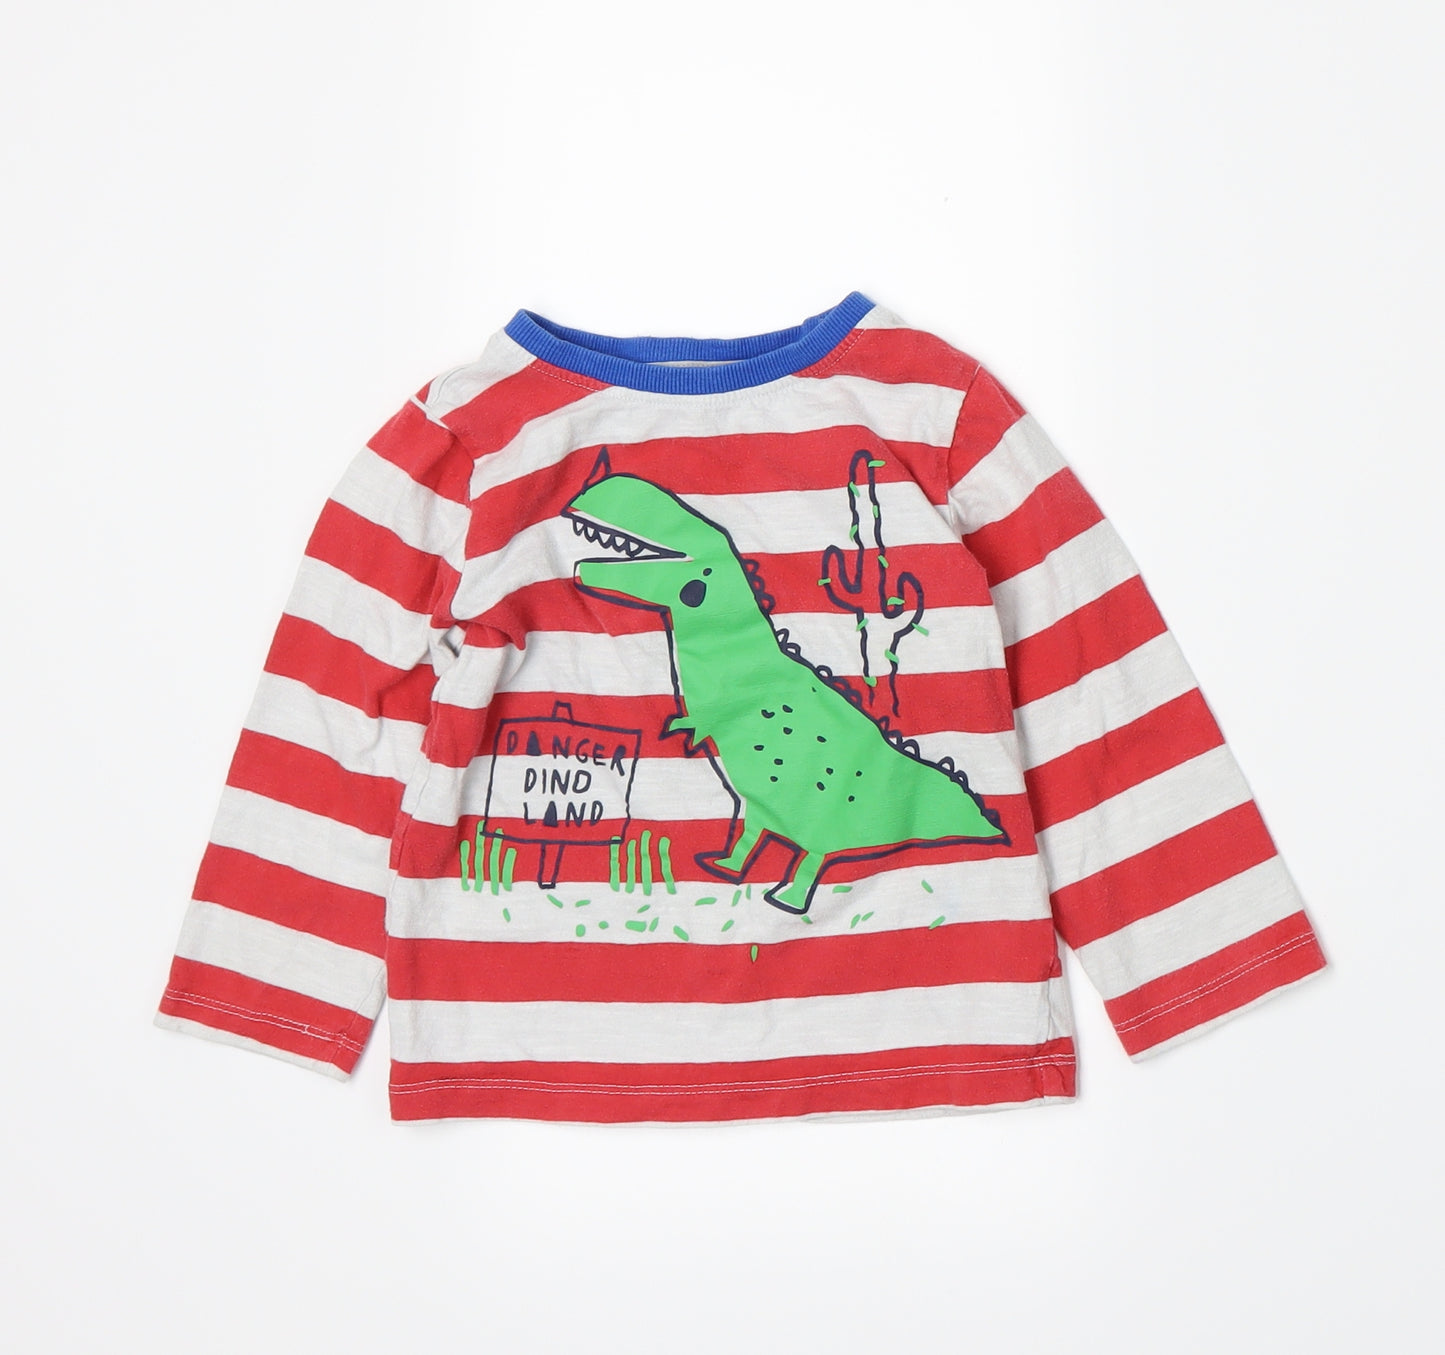 Mini Club Boys Red Spotted Jersey Basic T-Shirt Size 3-4 Years